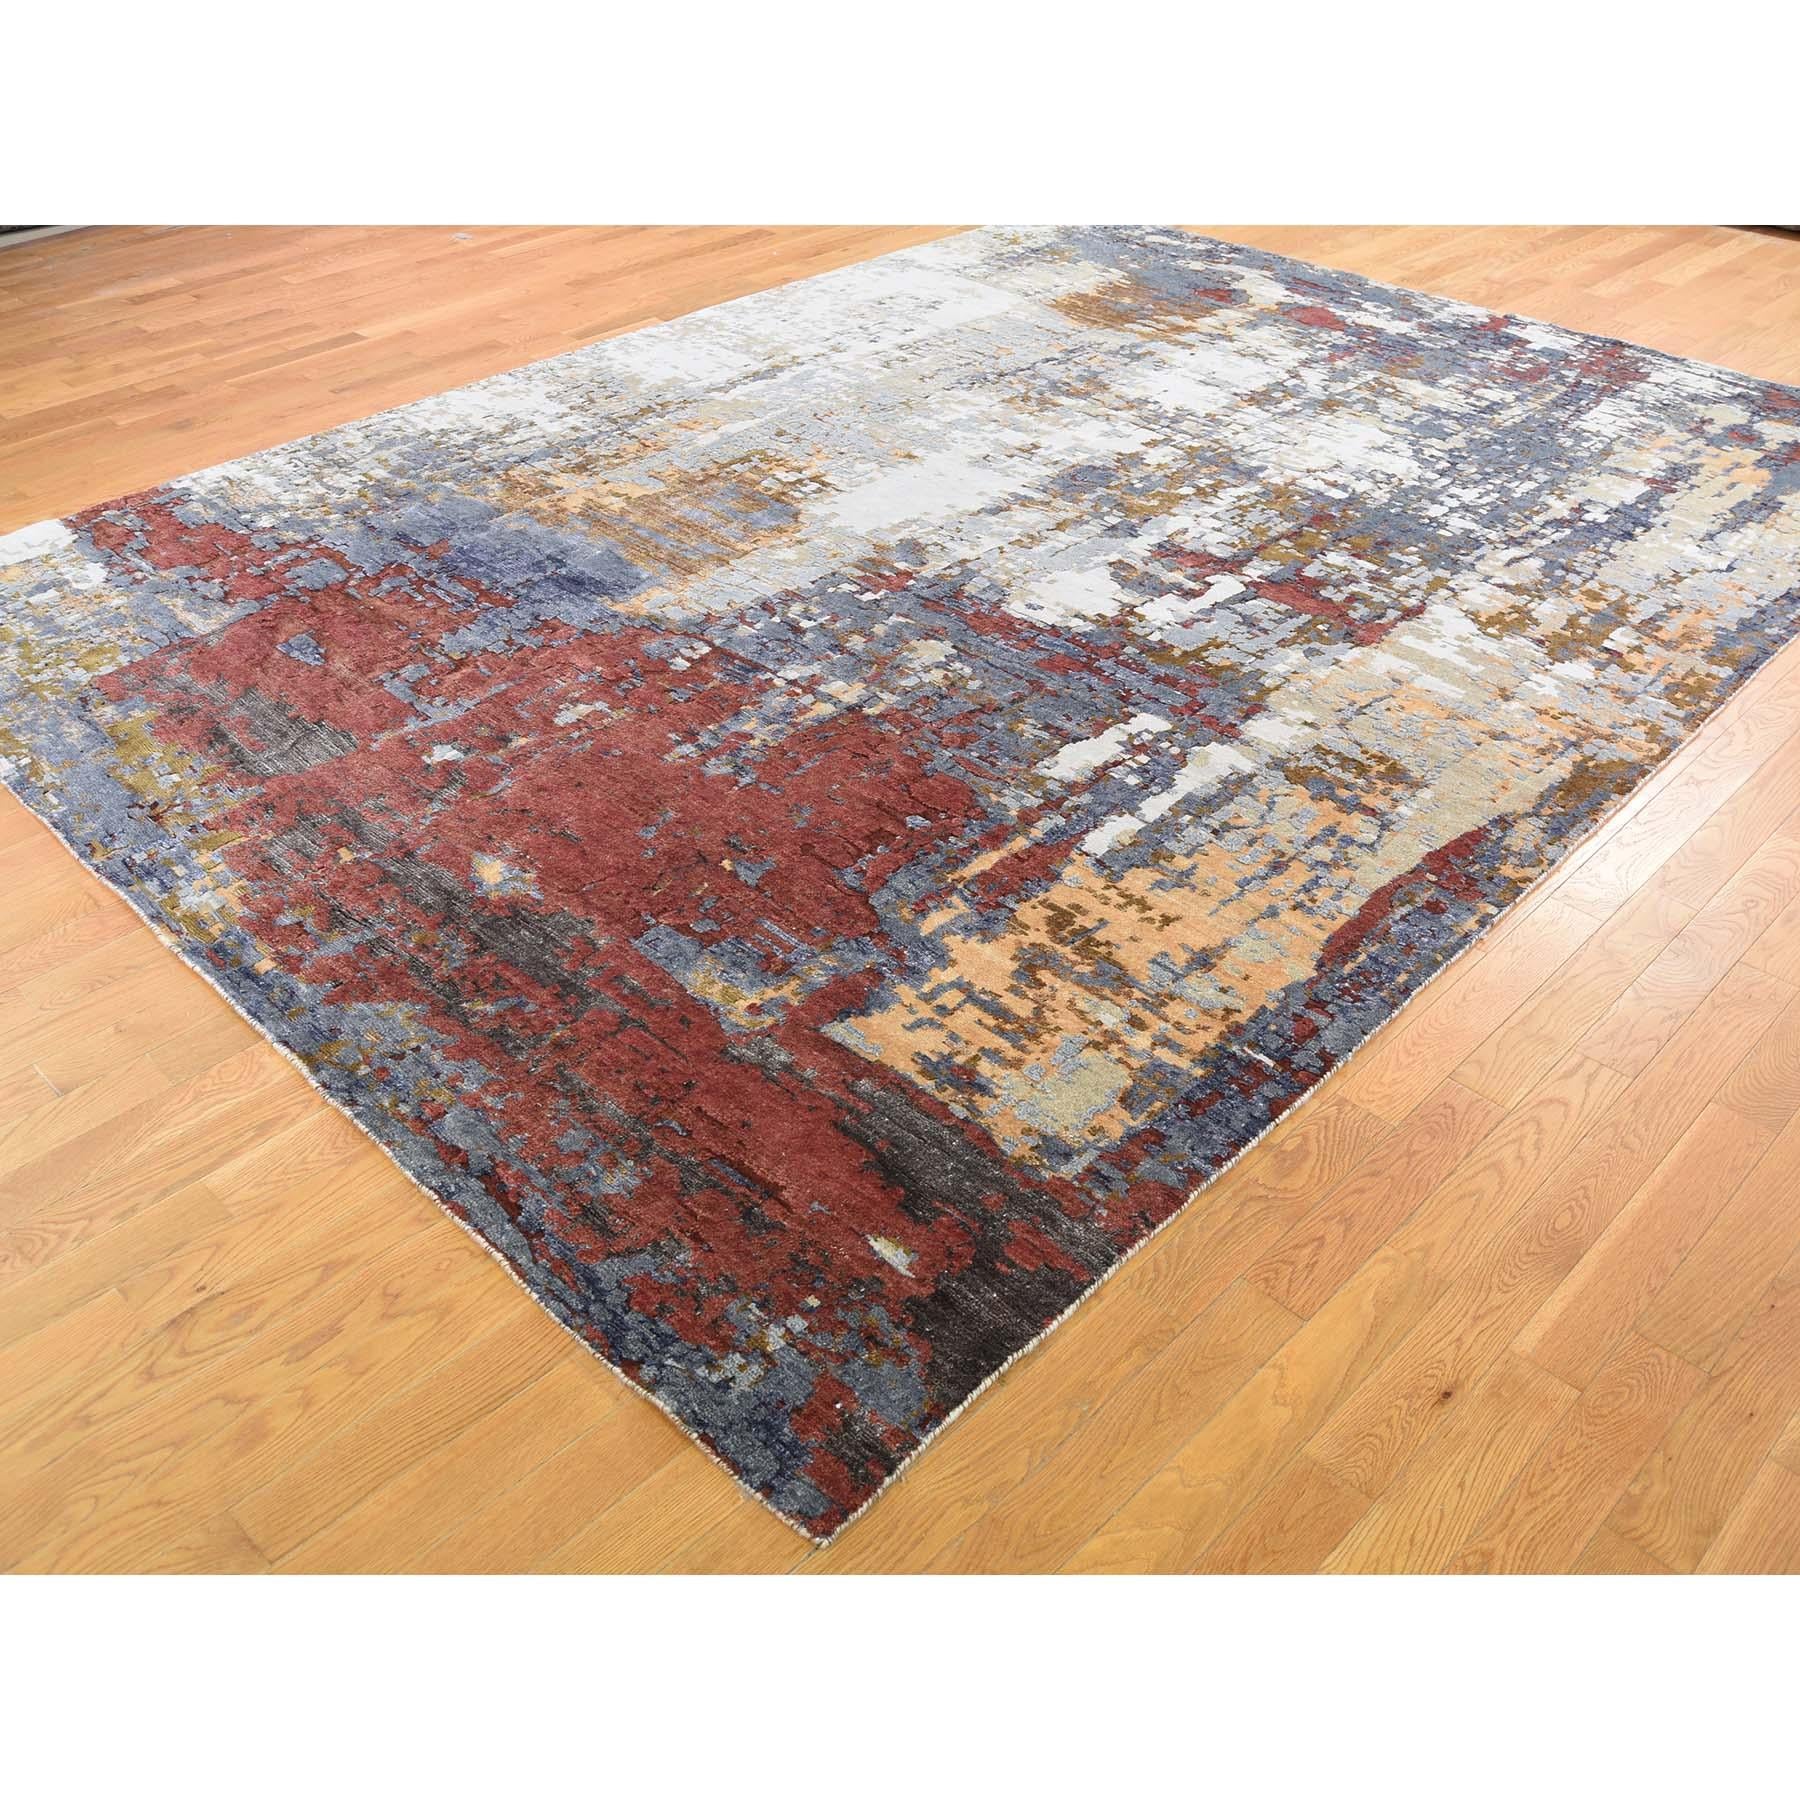 Afghan Wool and Silk Hi-Low Pile Modern Abstract Design Hand Knotted Rug